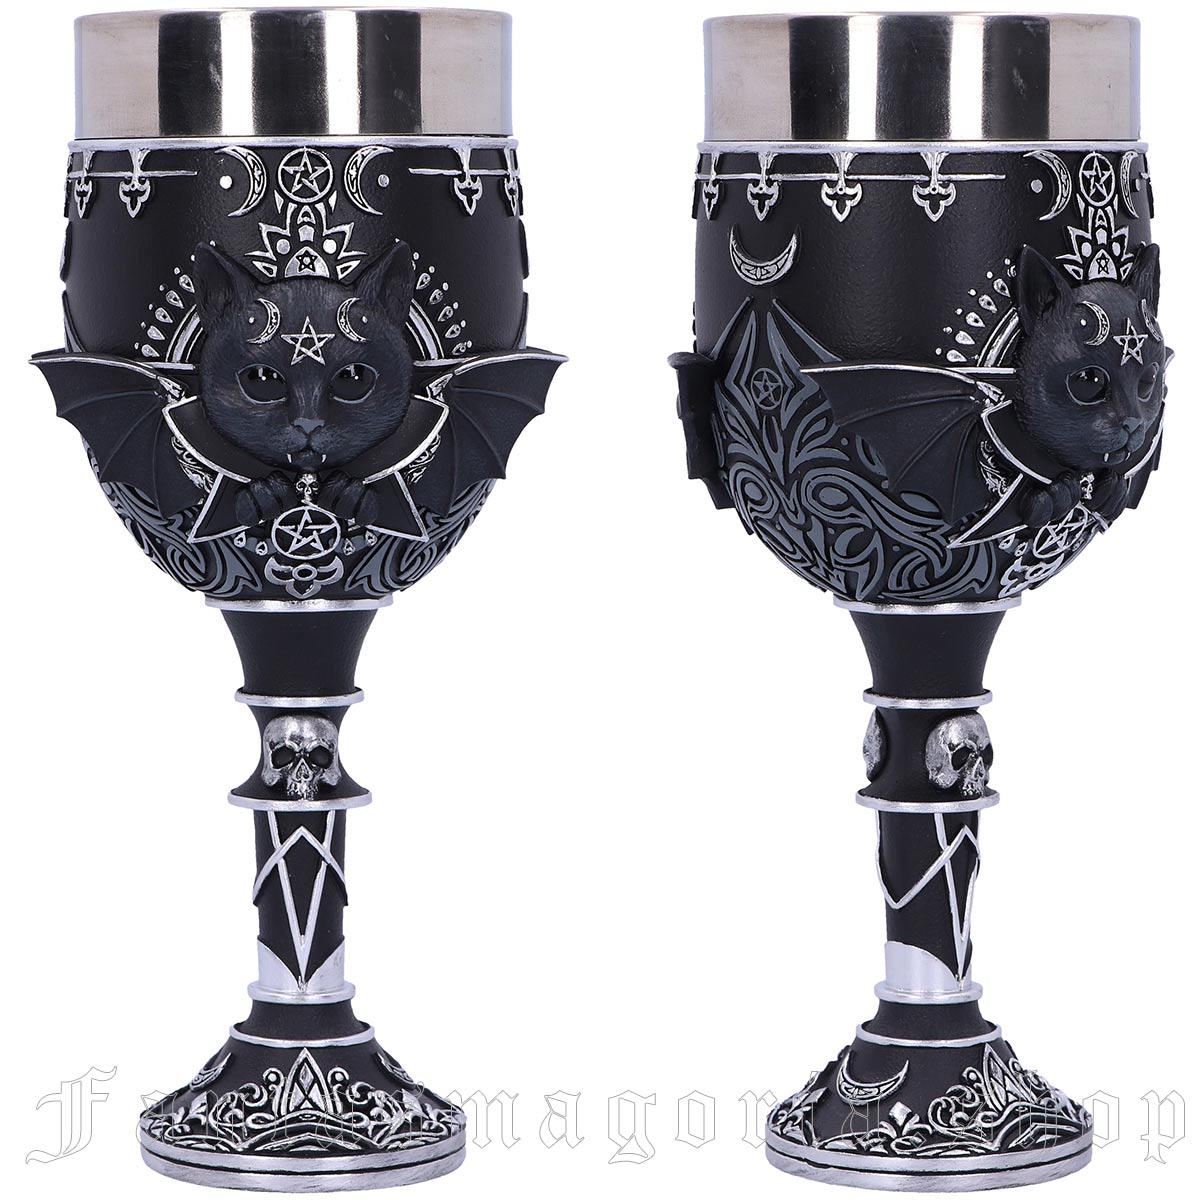 Malpuss - Gothic black and silver goblet with sculpted Malpus character detail